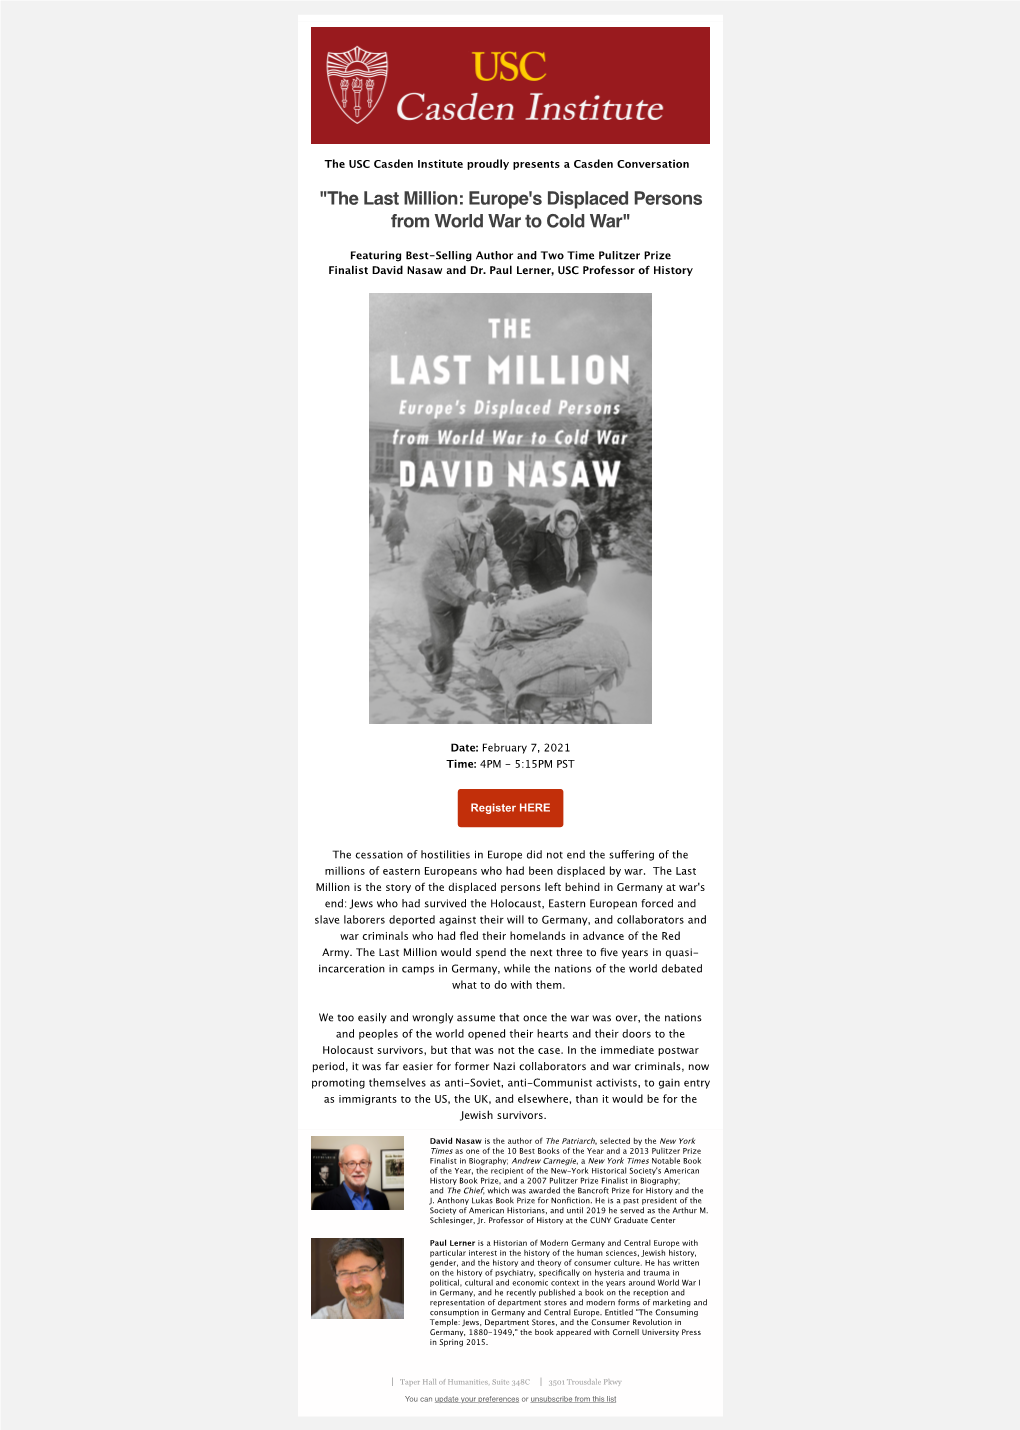 The Last Million: Europe's Displaced Persons from World War to Cold War"